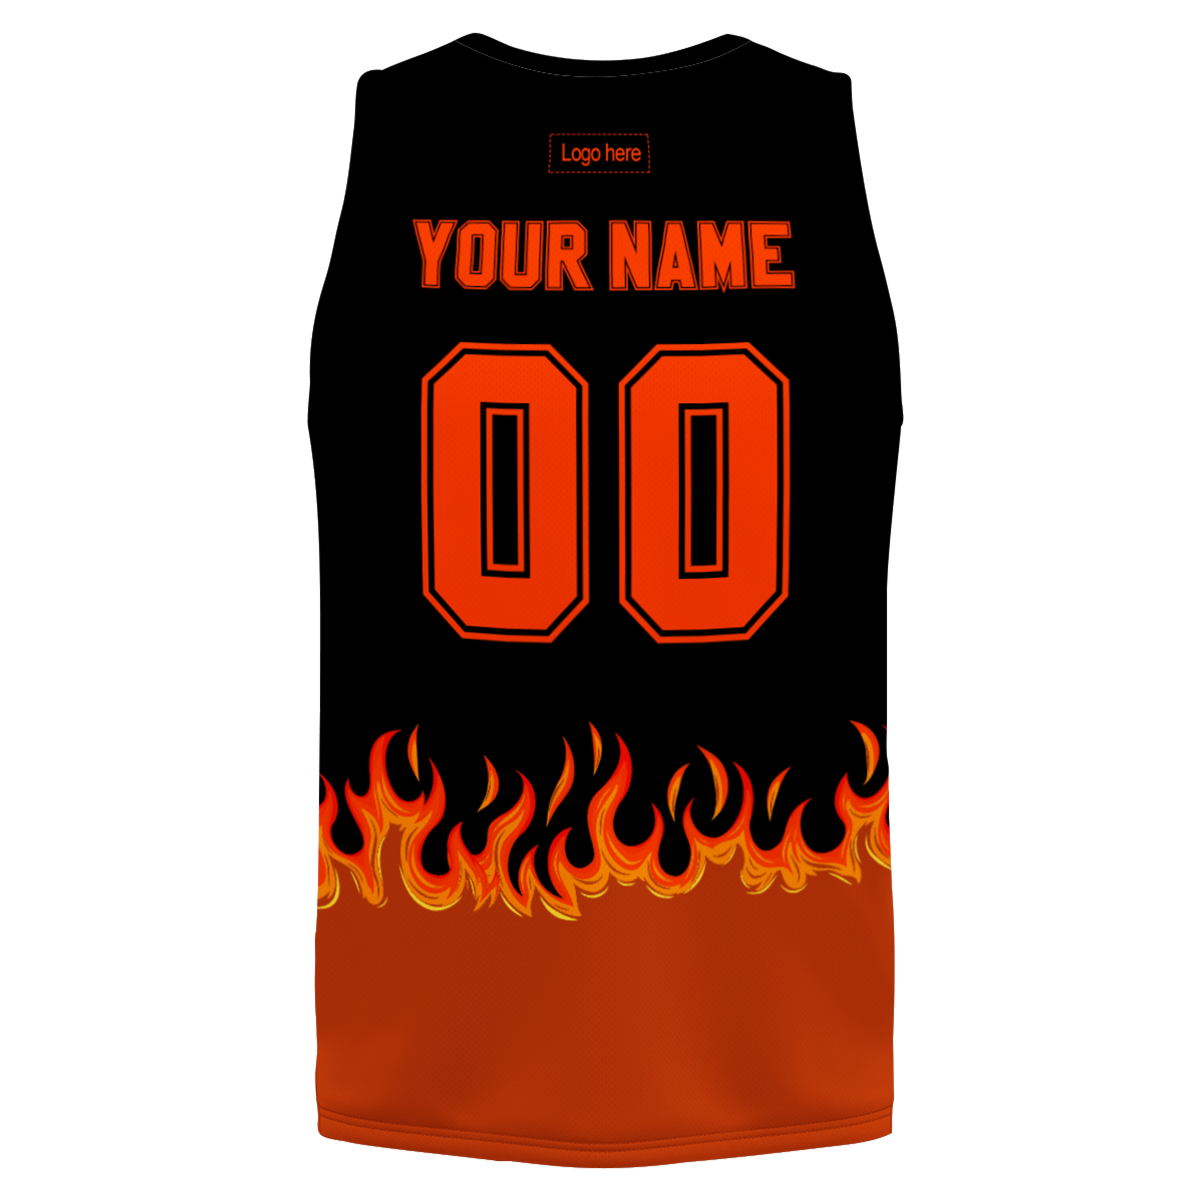 new-design-competitive-polyester-basketball-uniforms-digital-print-on-demand-basketball-suits-at-cj-pod-6